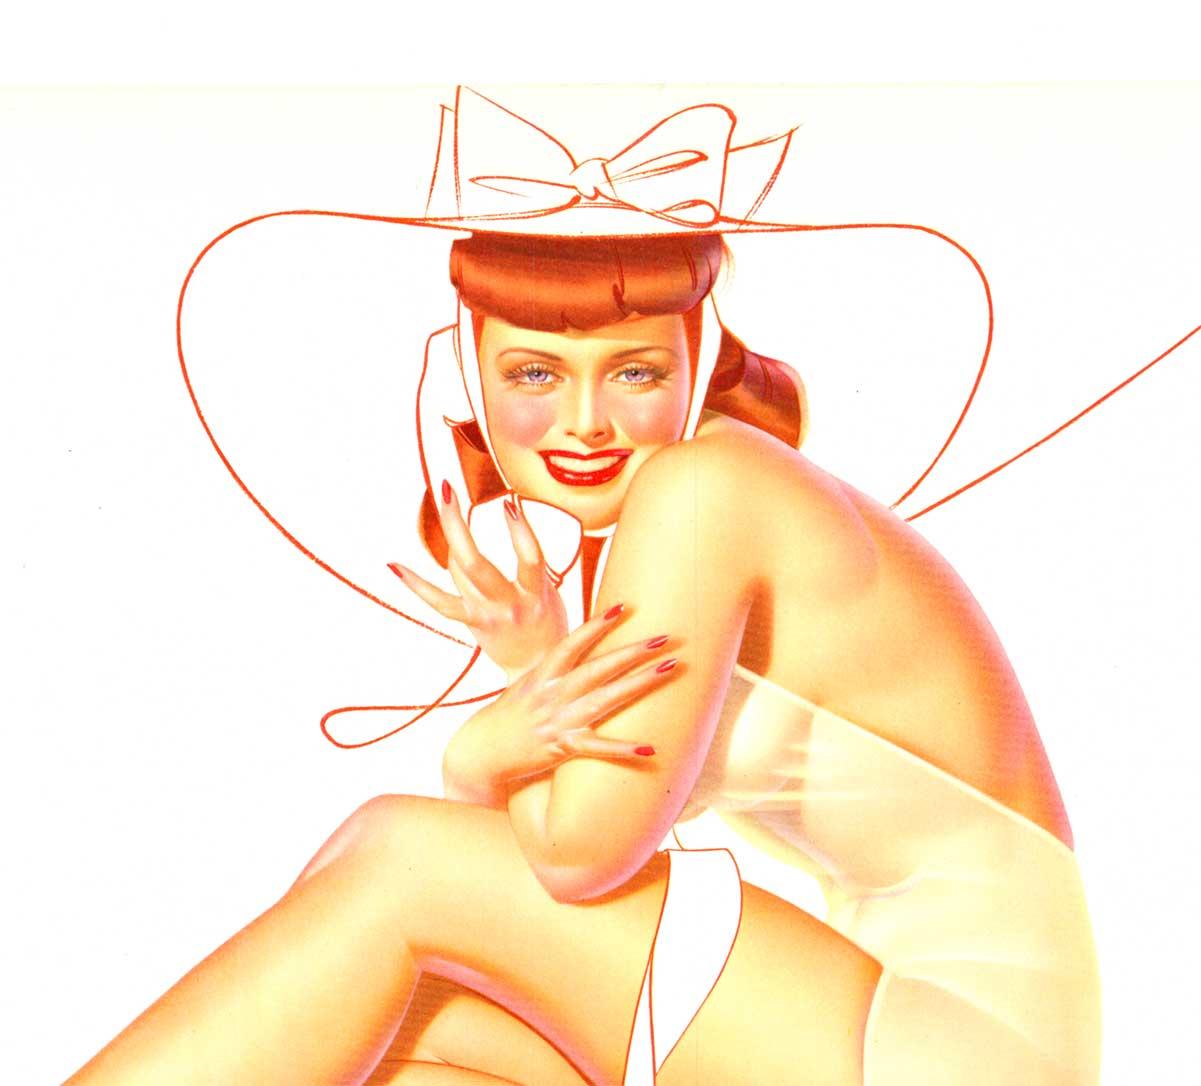 Original George Petty pinup, woman sitting with big sunhat and telephone.  Archivally linen backed vintage pinup in very fine condition, ready to frame.   (Note:  this lithograph is NOT removed from a pinup calendar!)

Introducing the original